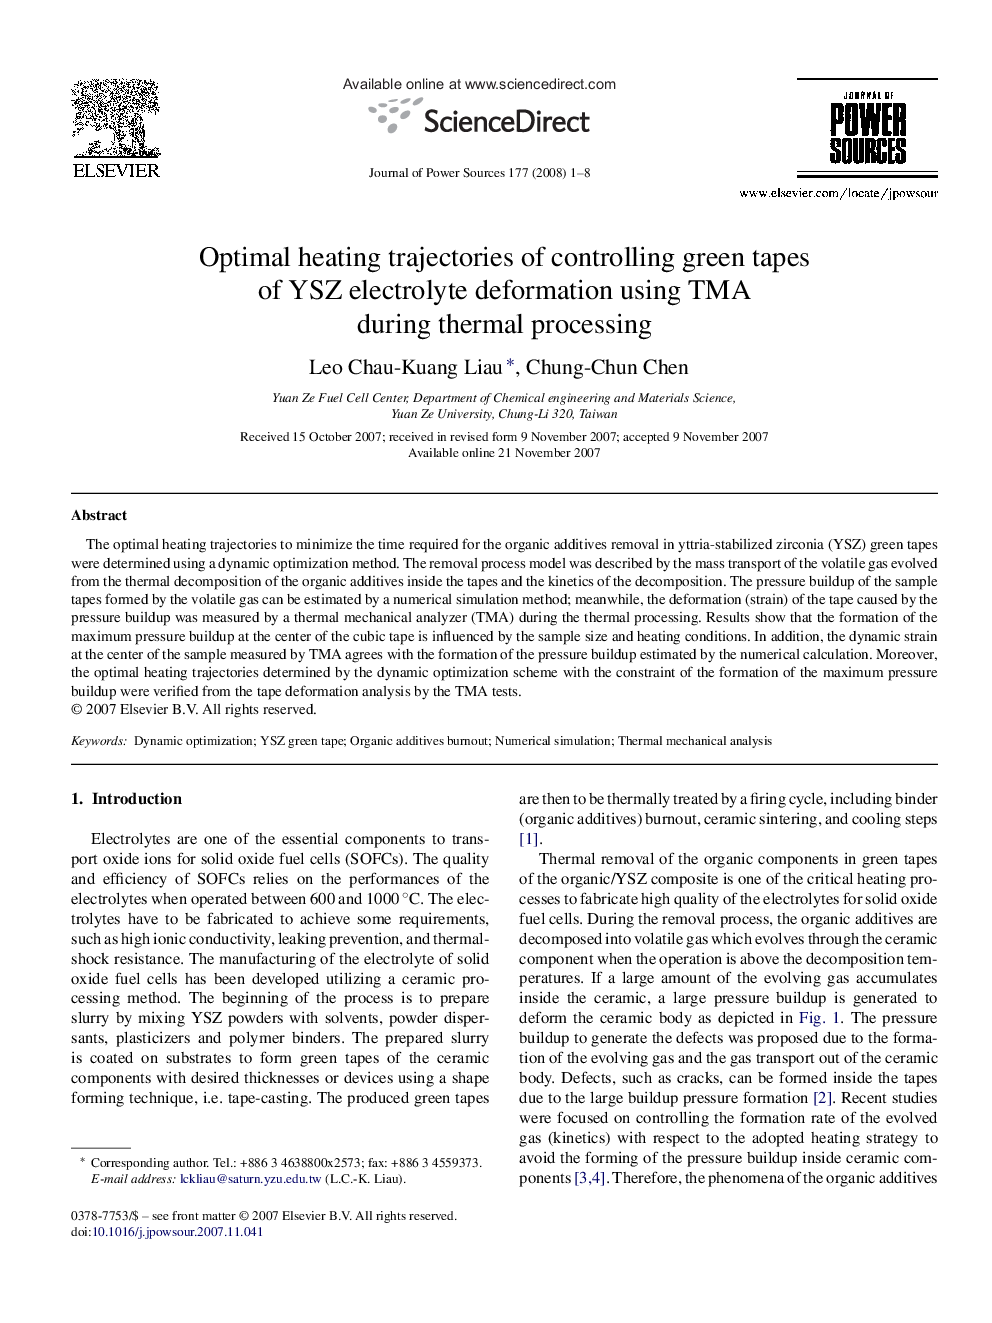 Optimal heating trajectories of controlling green tapes of YSZ electrolyte deformation using TMA during thermal processing